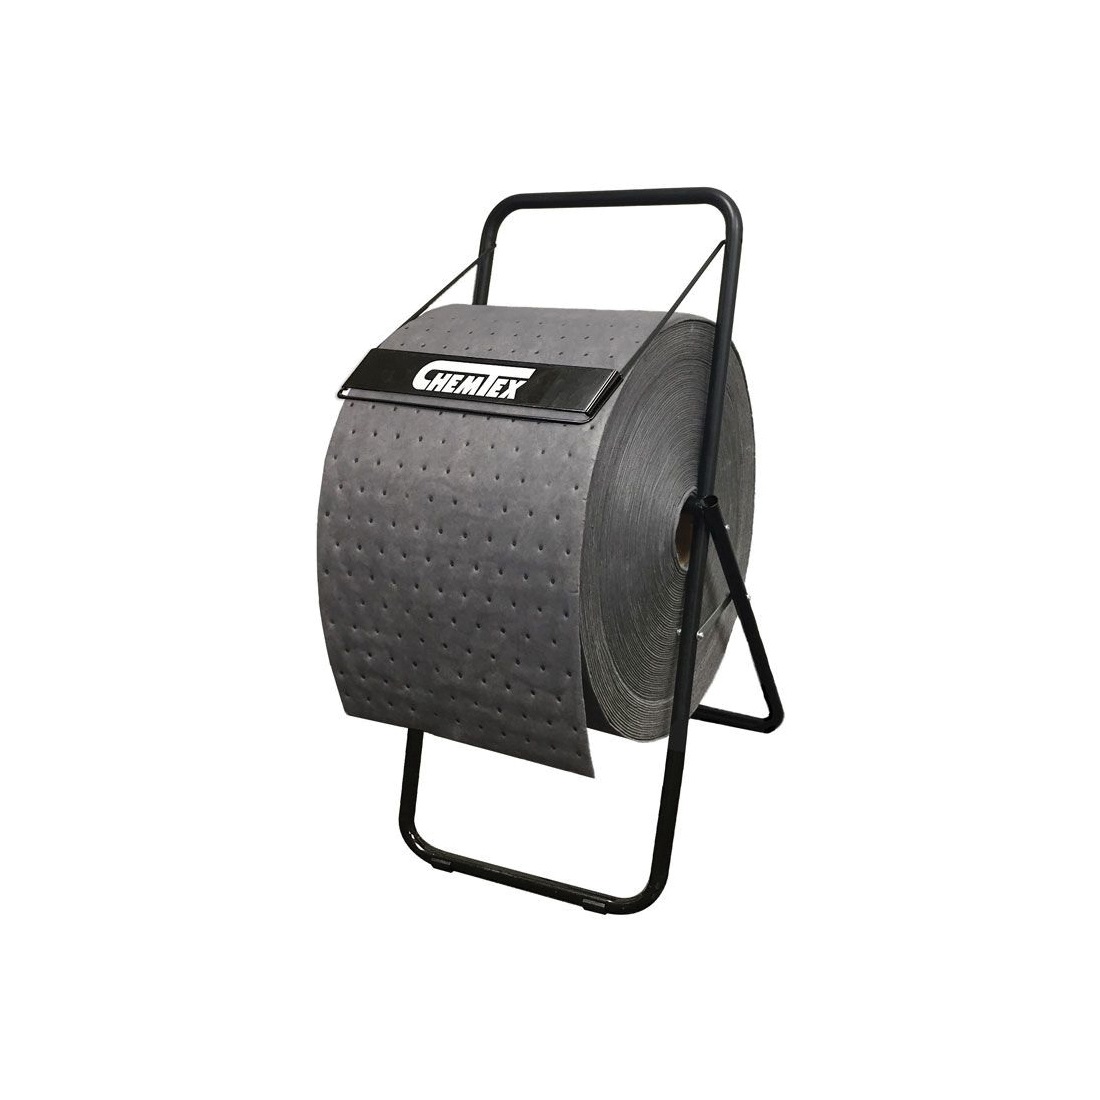 Chemtex RHGS200 Meltblown Roll, 12 in W, 200 ft L, 7-1/2 in, 19 in Perforated, Lint-Free Linting, Polypropylene